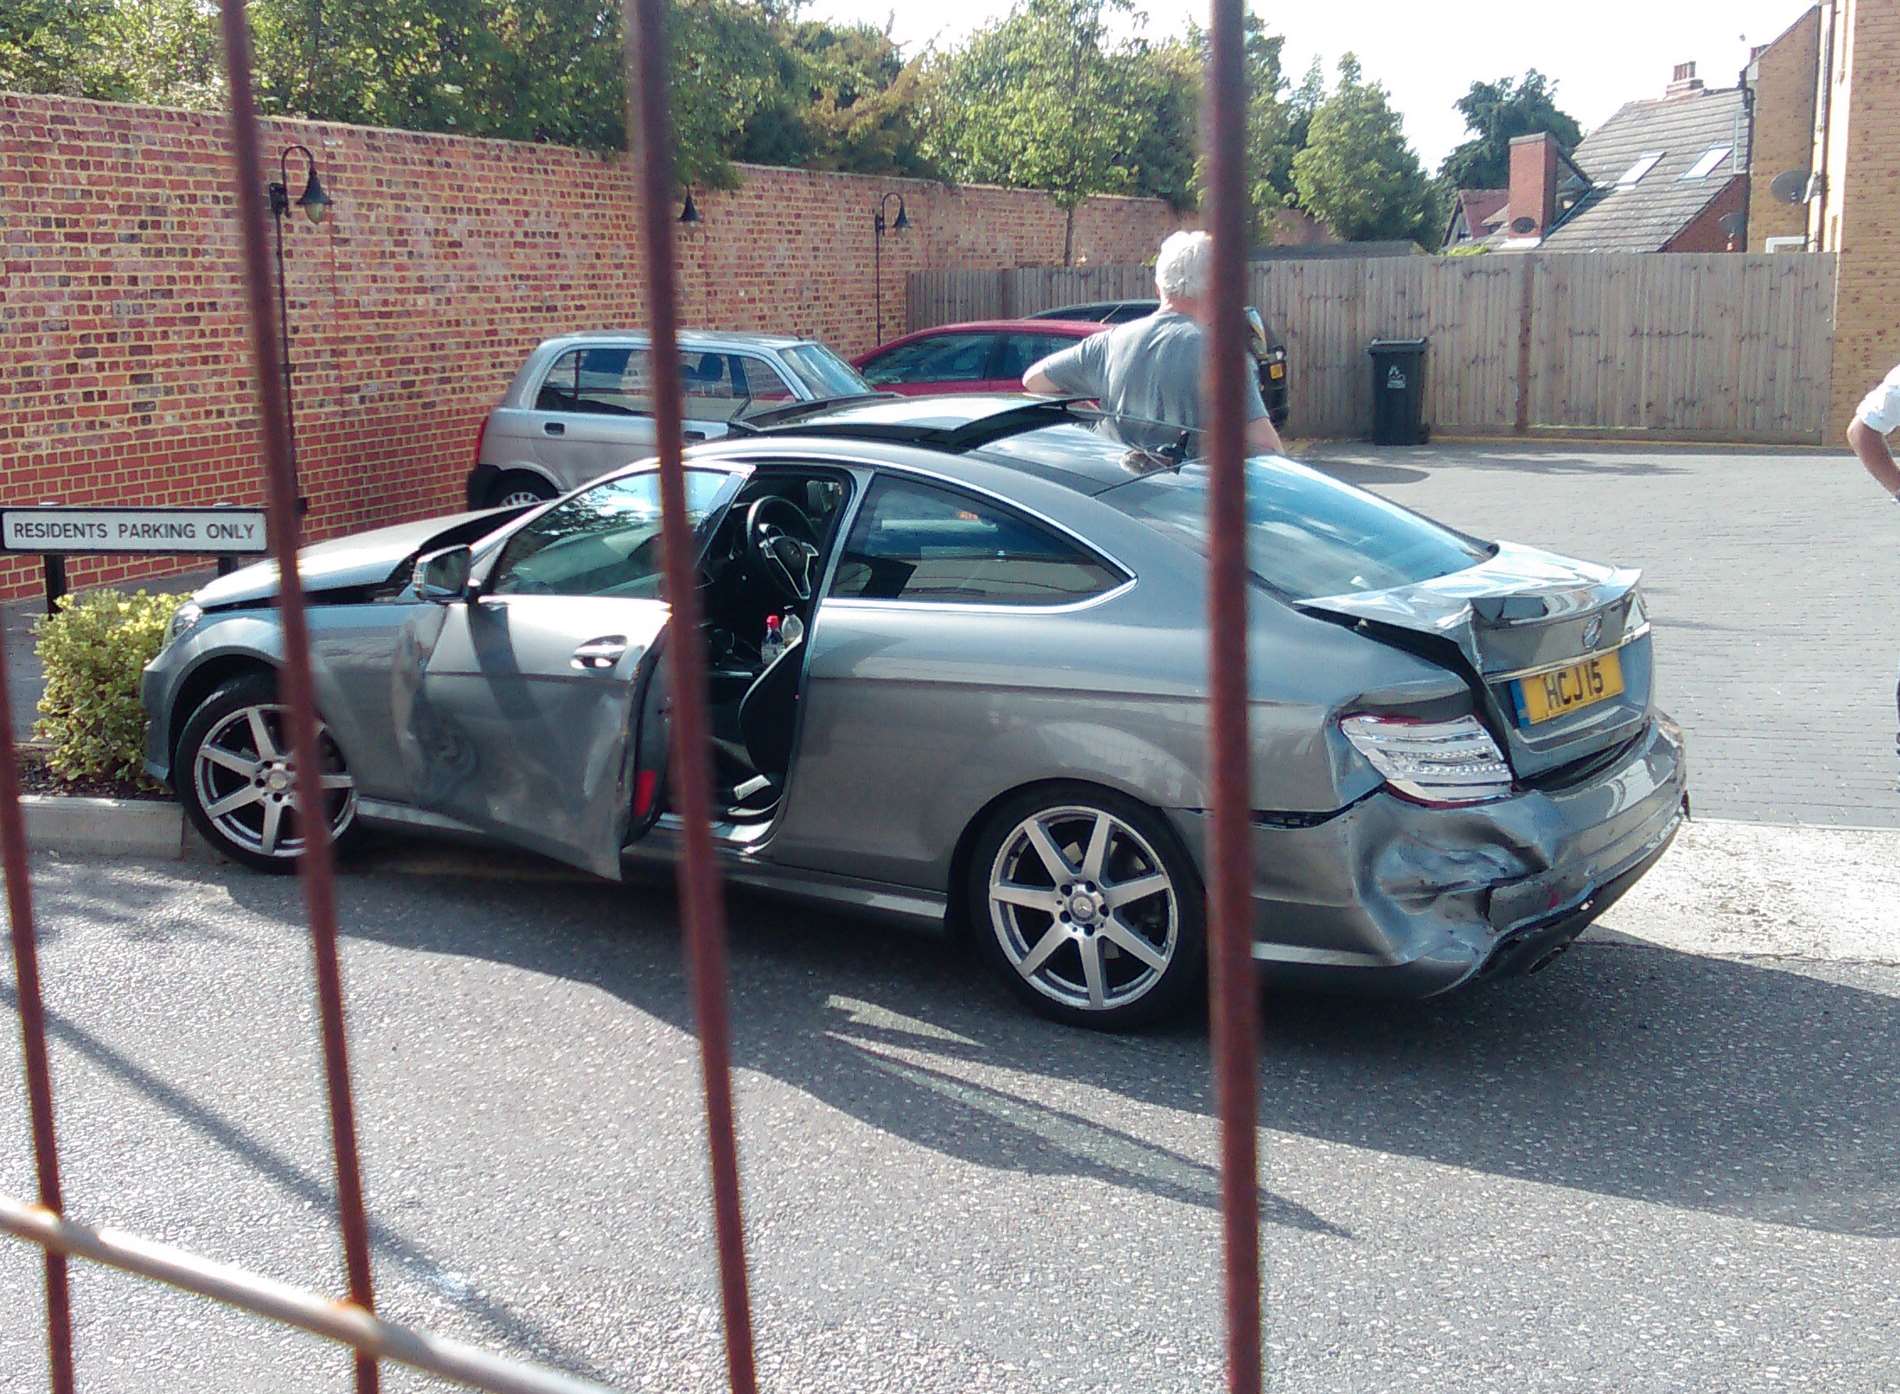 A car was said to have collided with the woman, and several parked cars